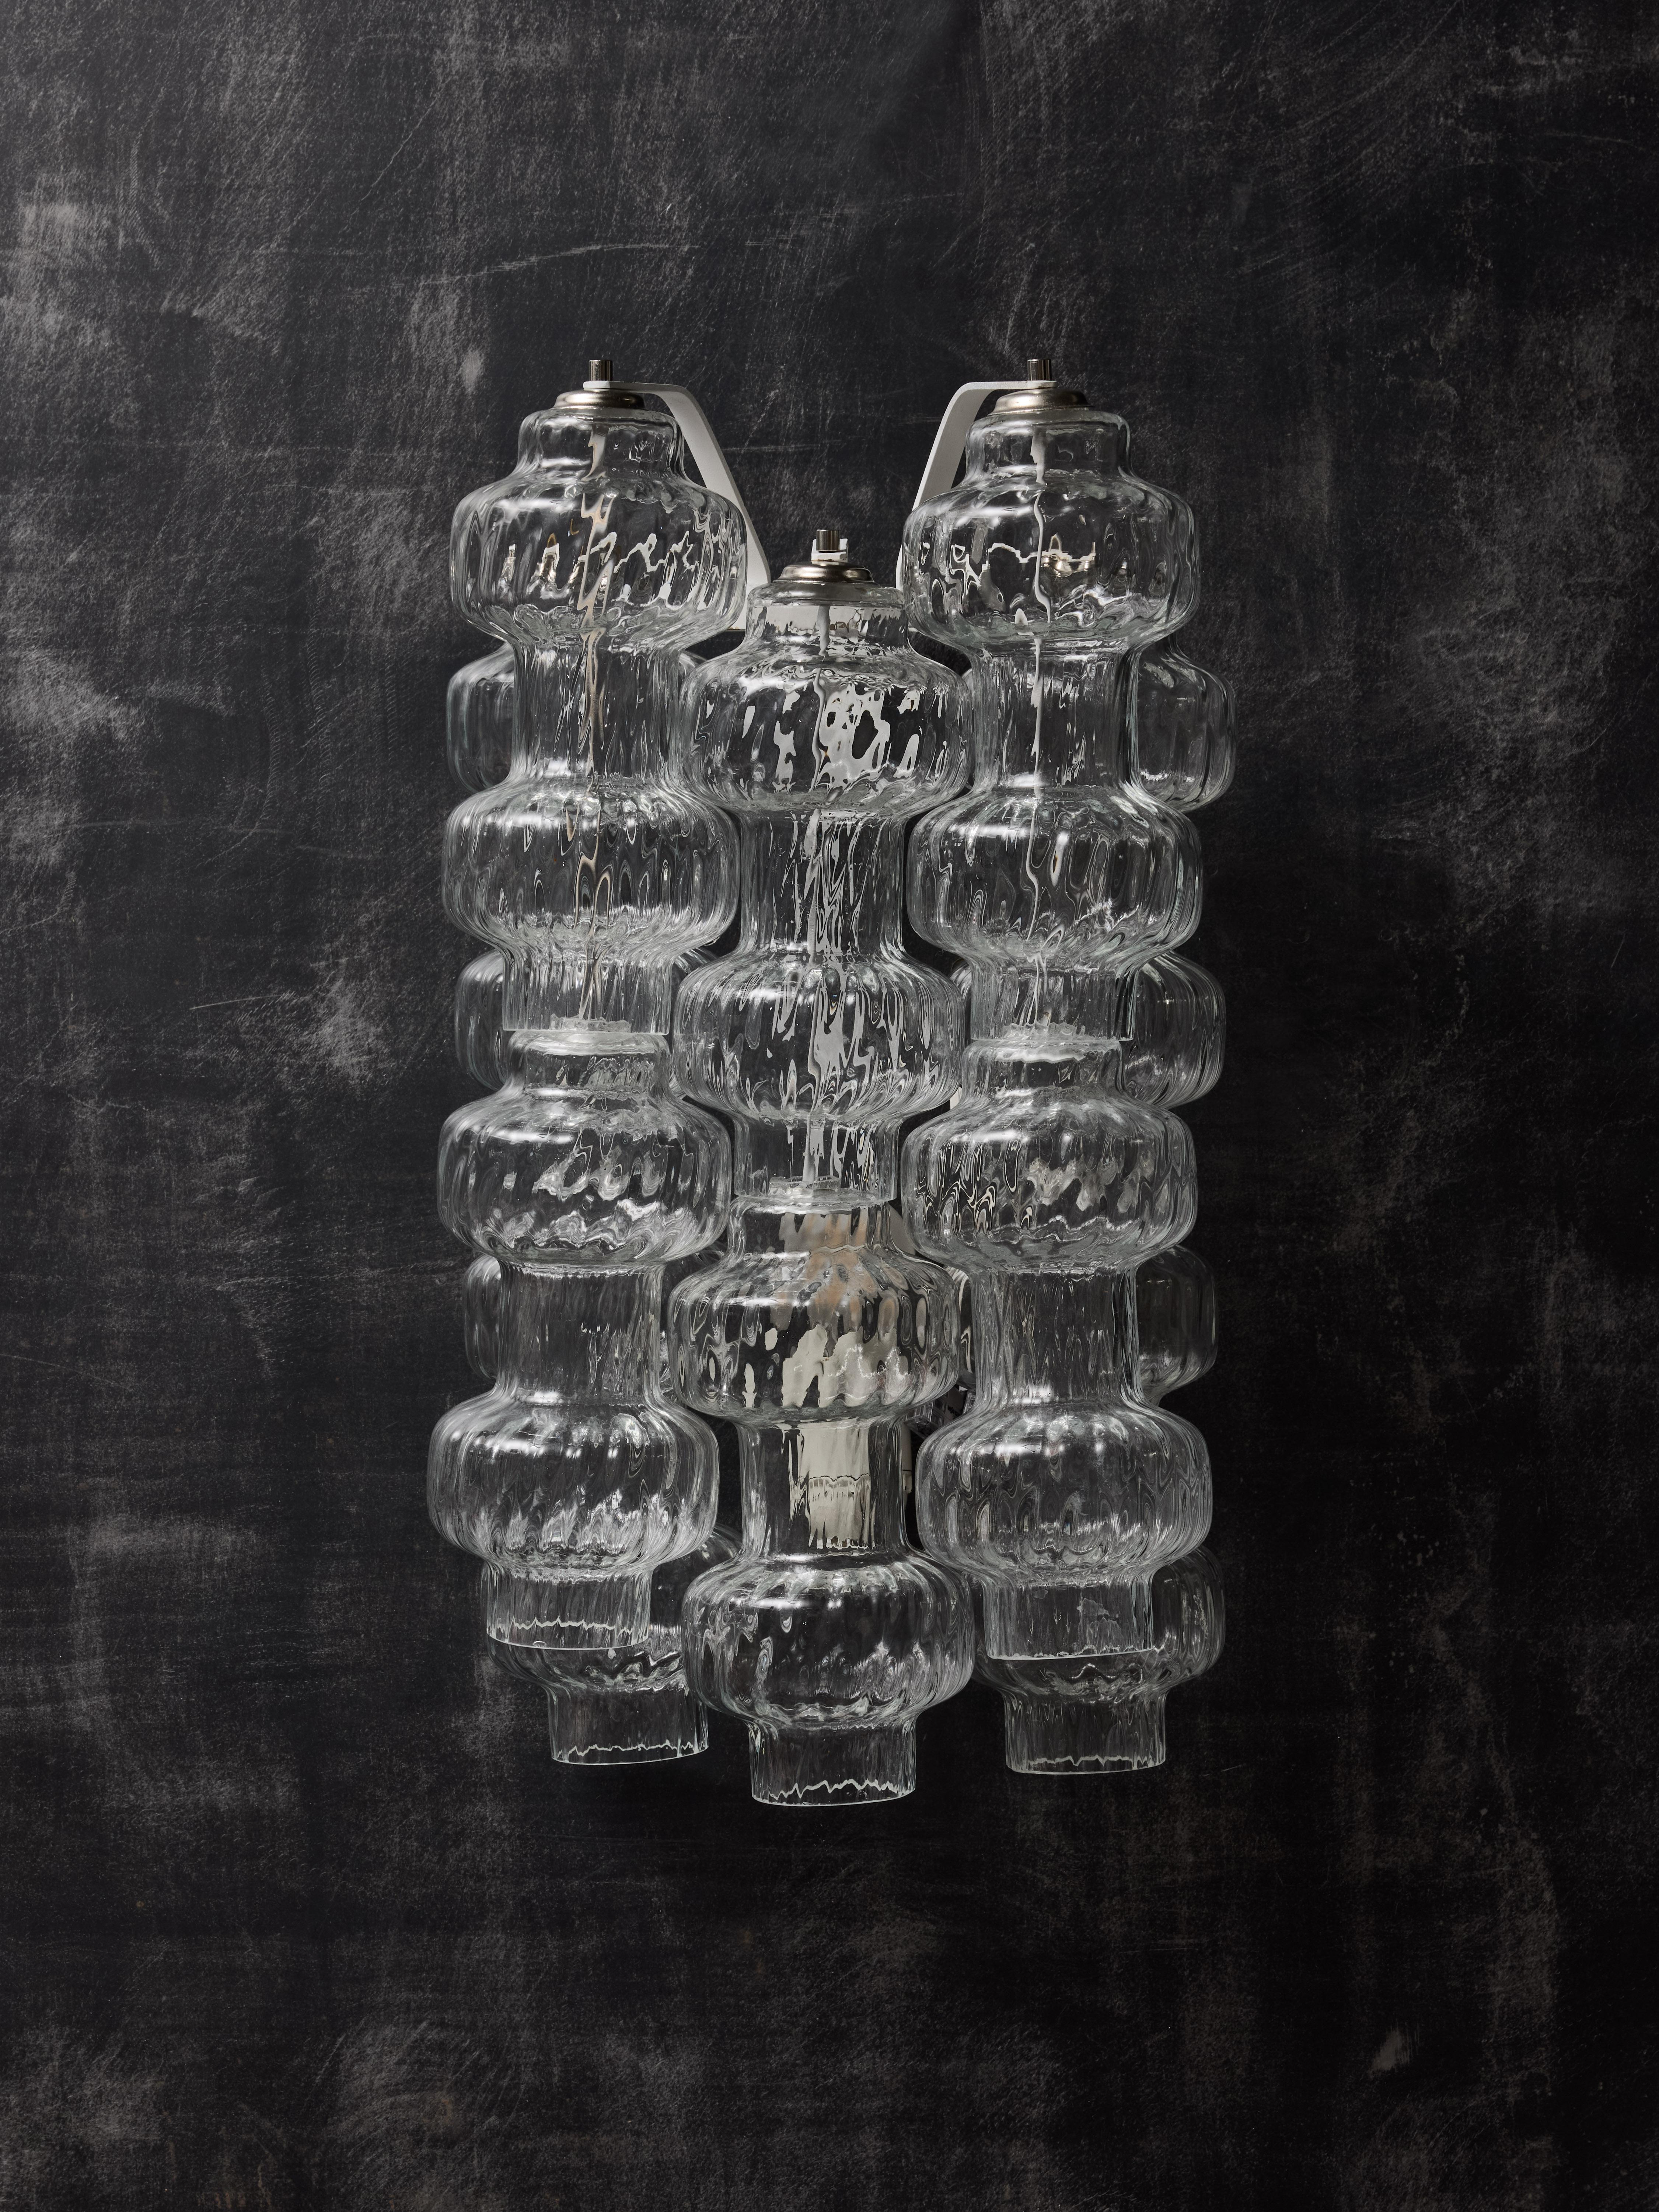 Pair of wall sconces made of a painted metal structure from which hangs five stacks of two Murano glass blown pieces. One source of light per sconce.

CARLO SCARPA (1906 – 1978)

Carlo Scarpa was an Italian architect and designer who drew